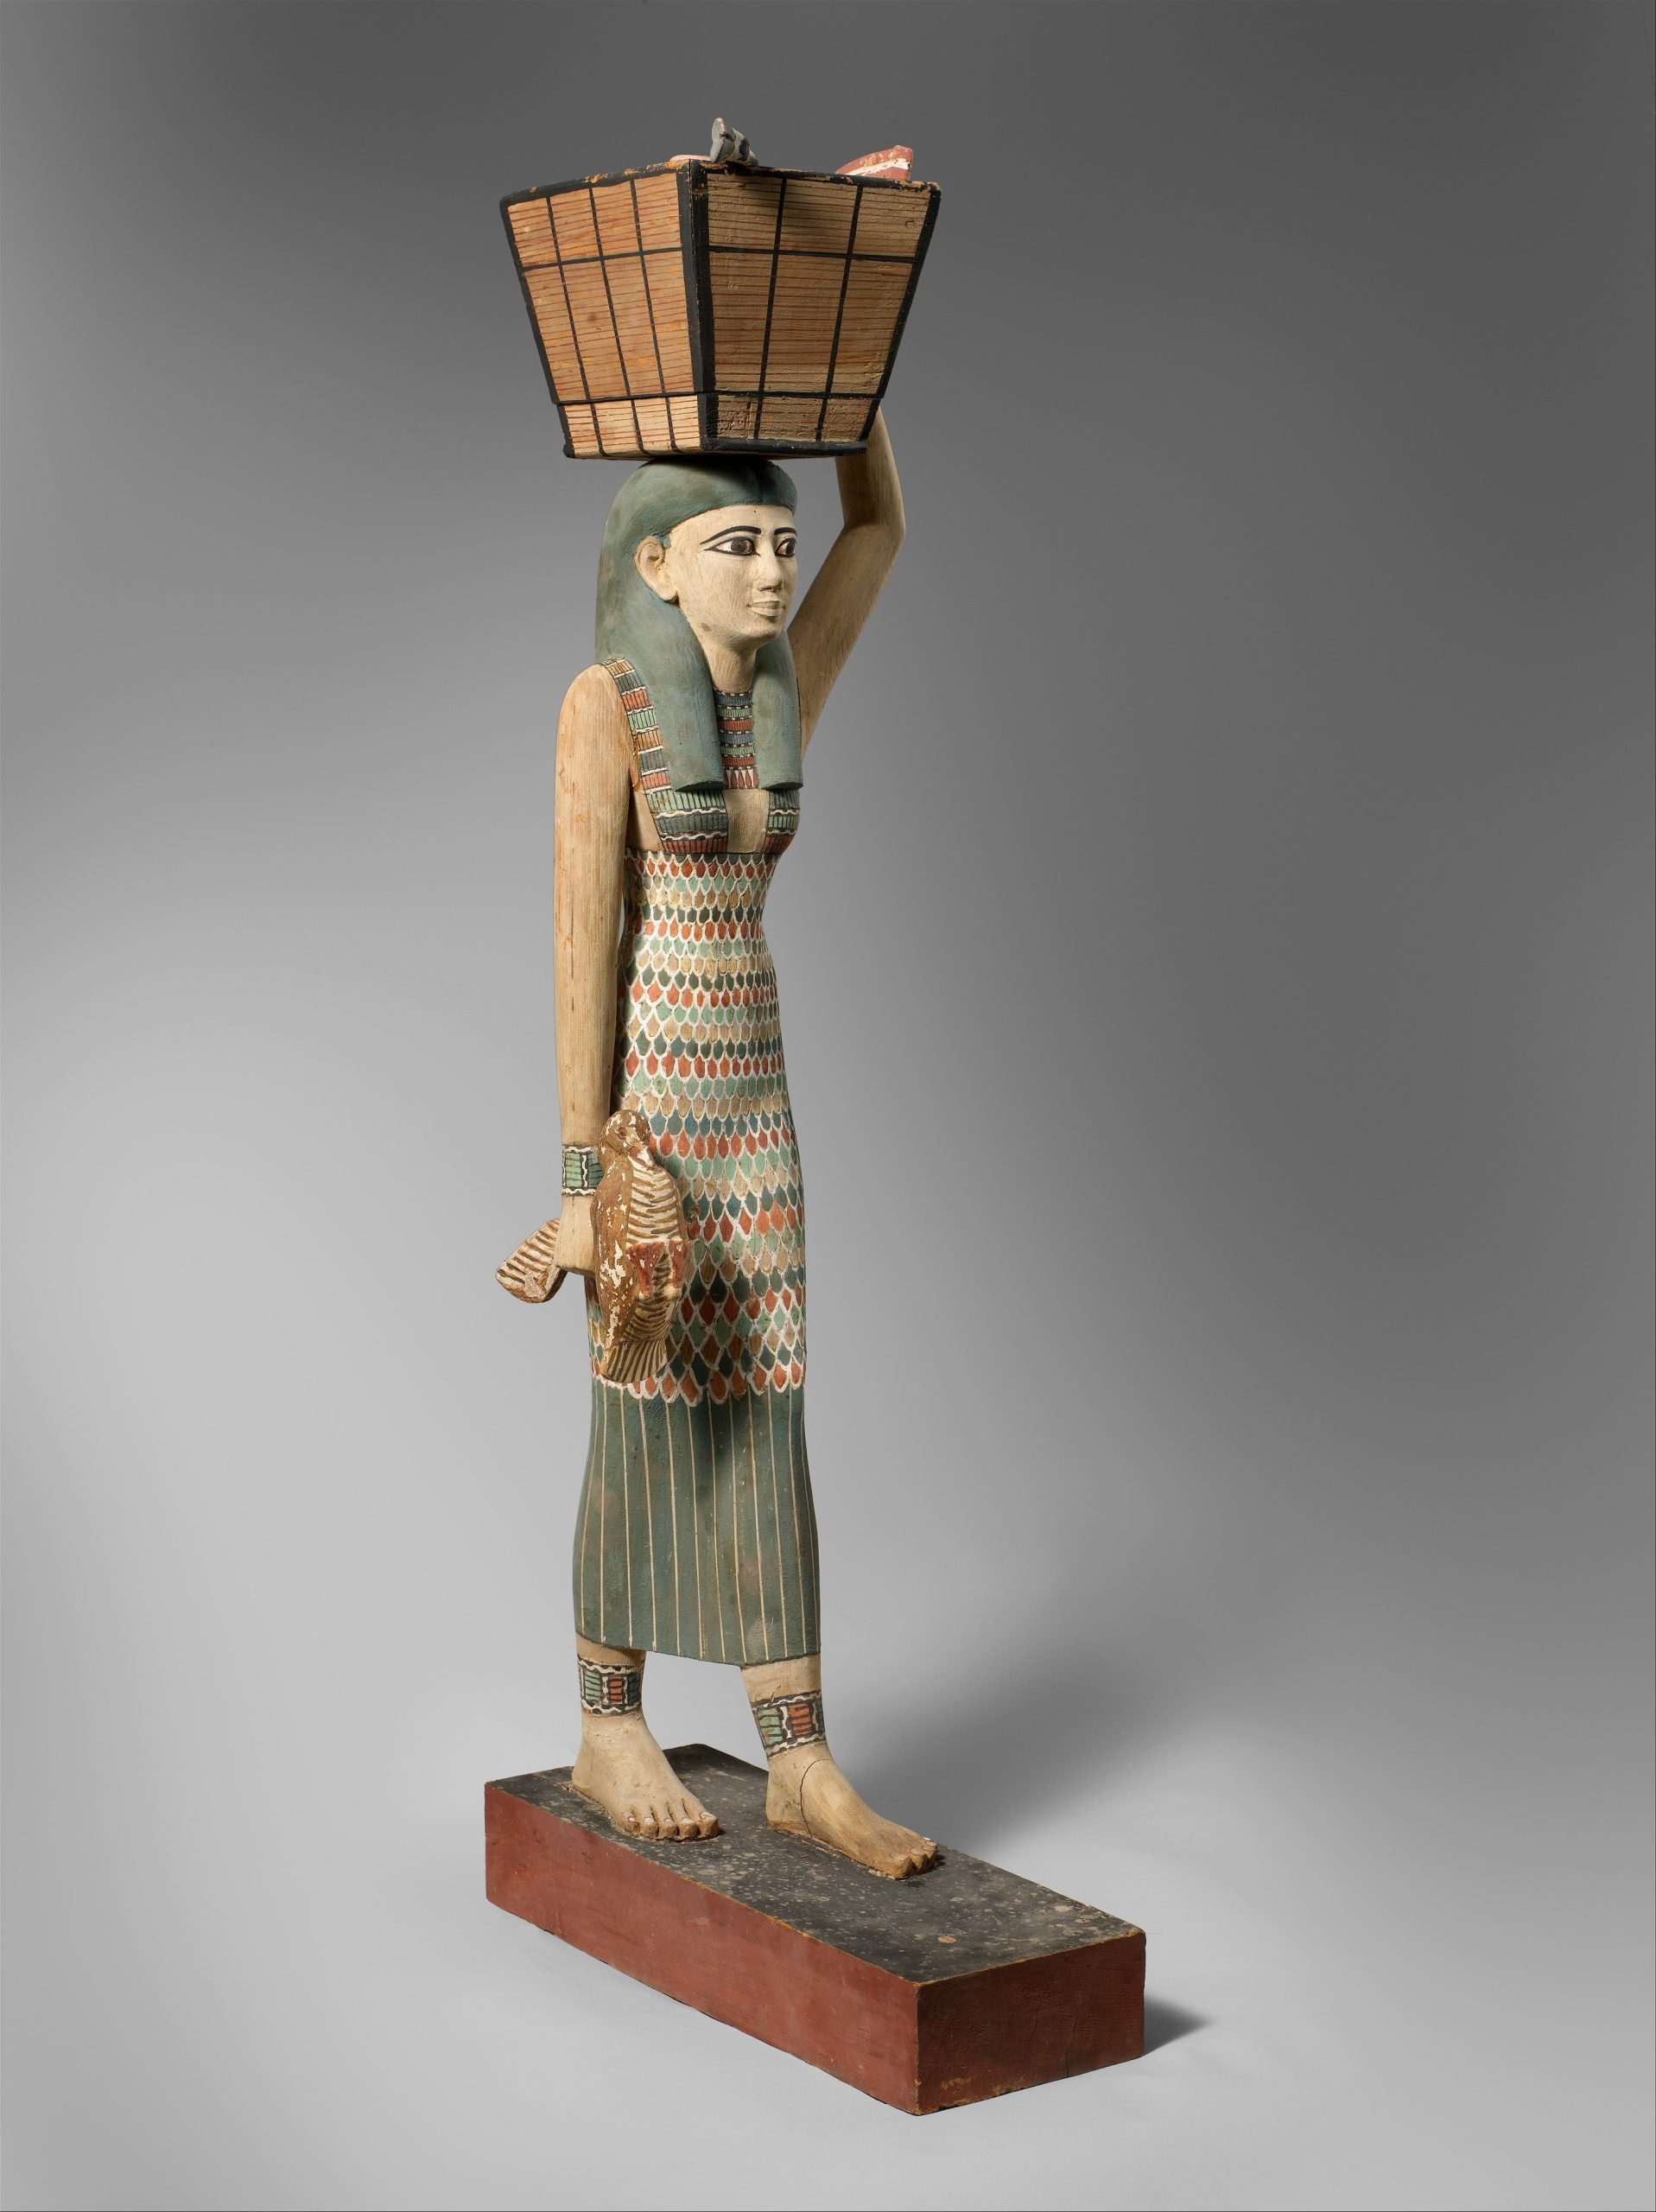 Egyptian statue depicting a person holding a basket over their head.